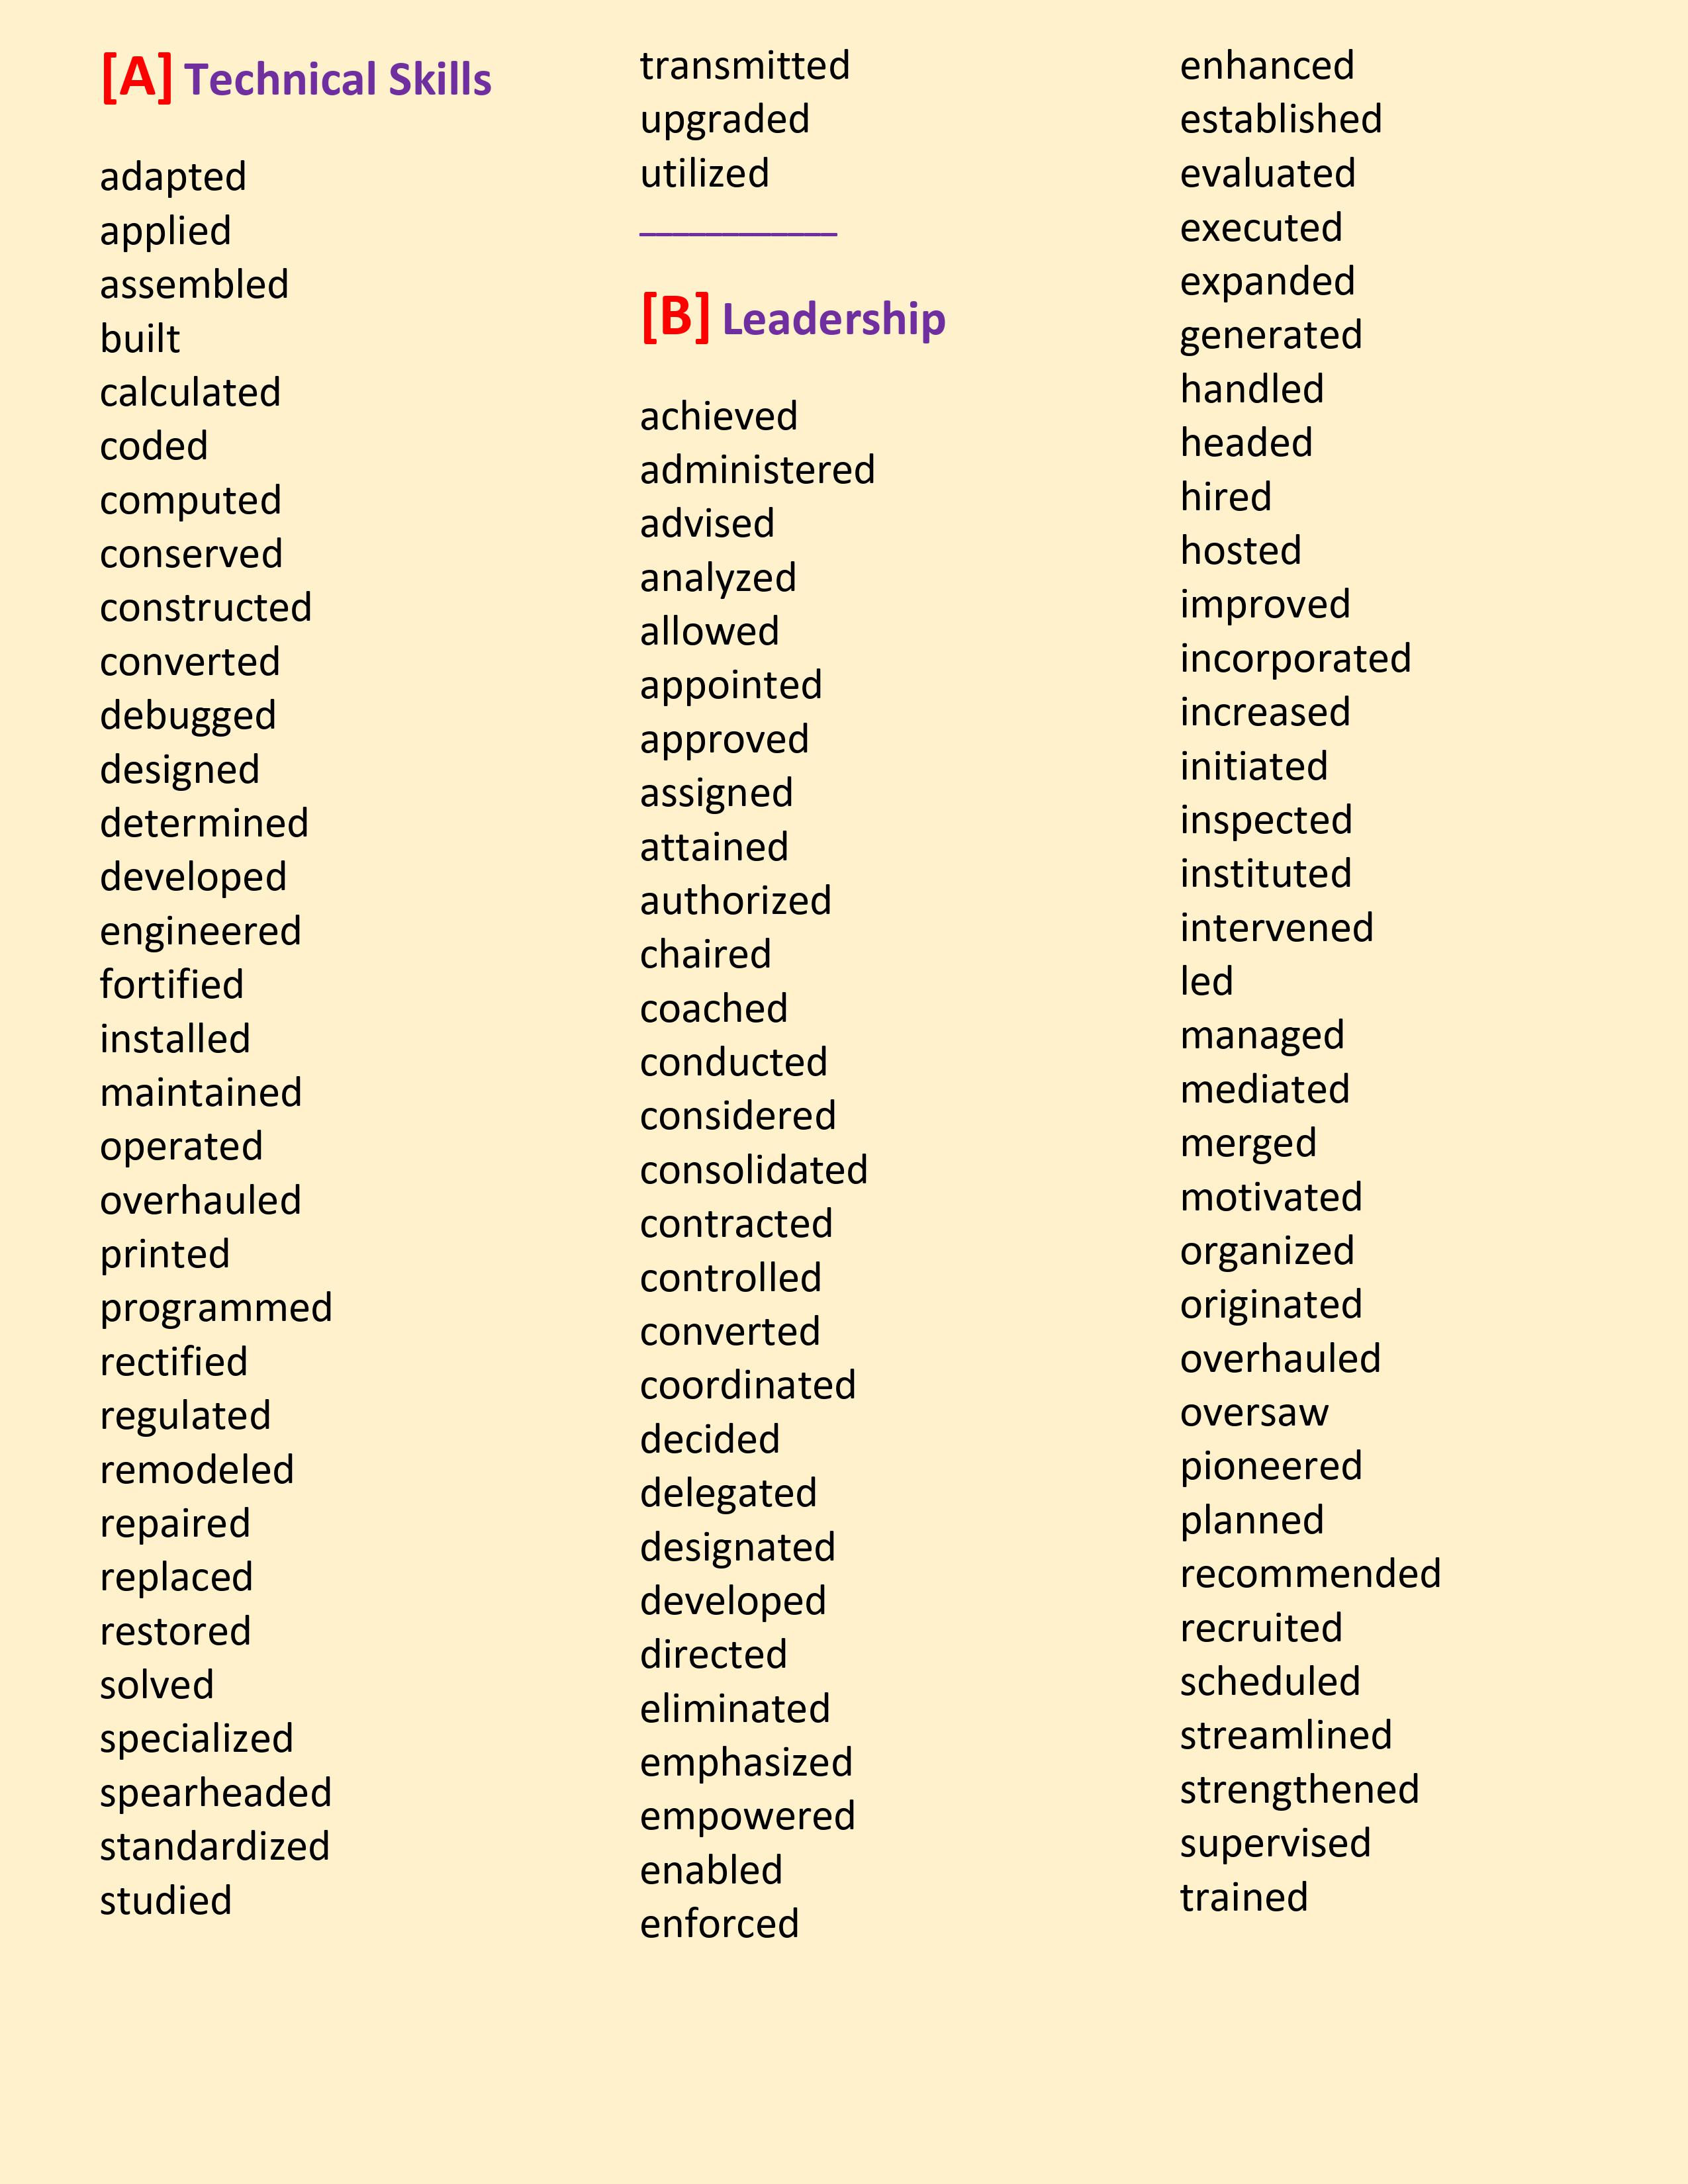 400-action-verbs-to-empower-your-resume-covers-12-categories